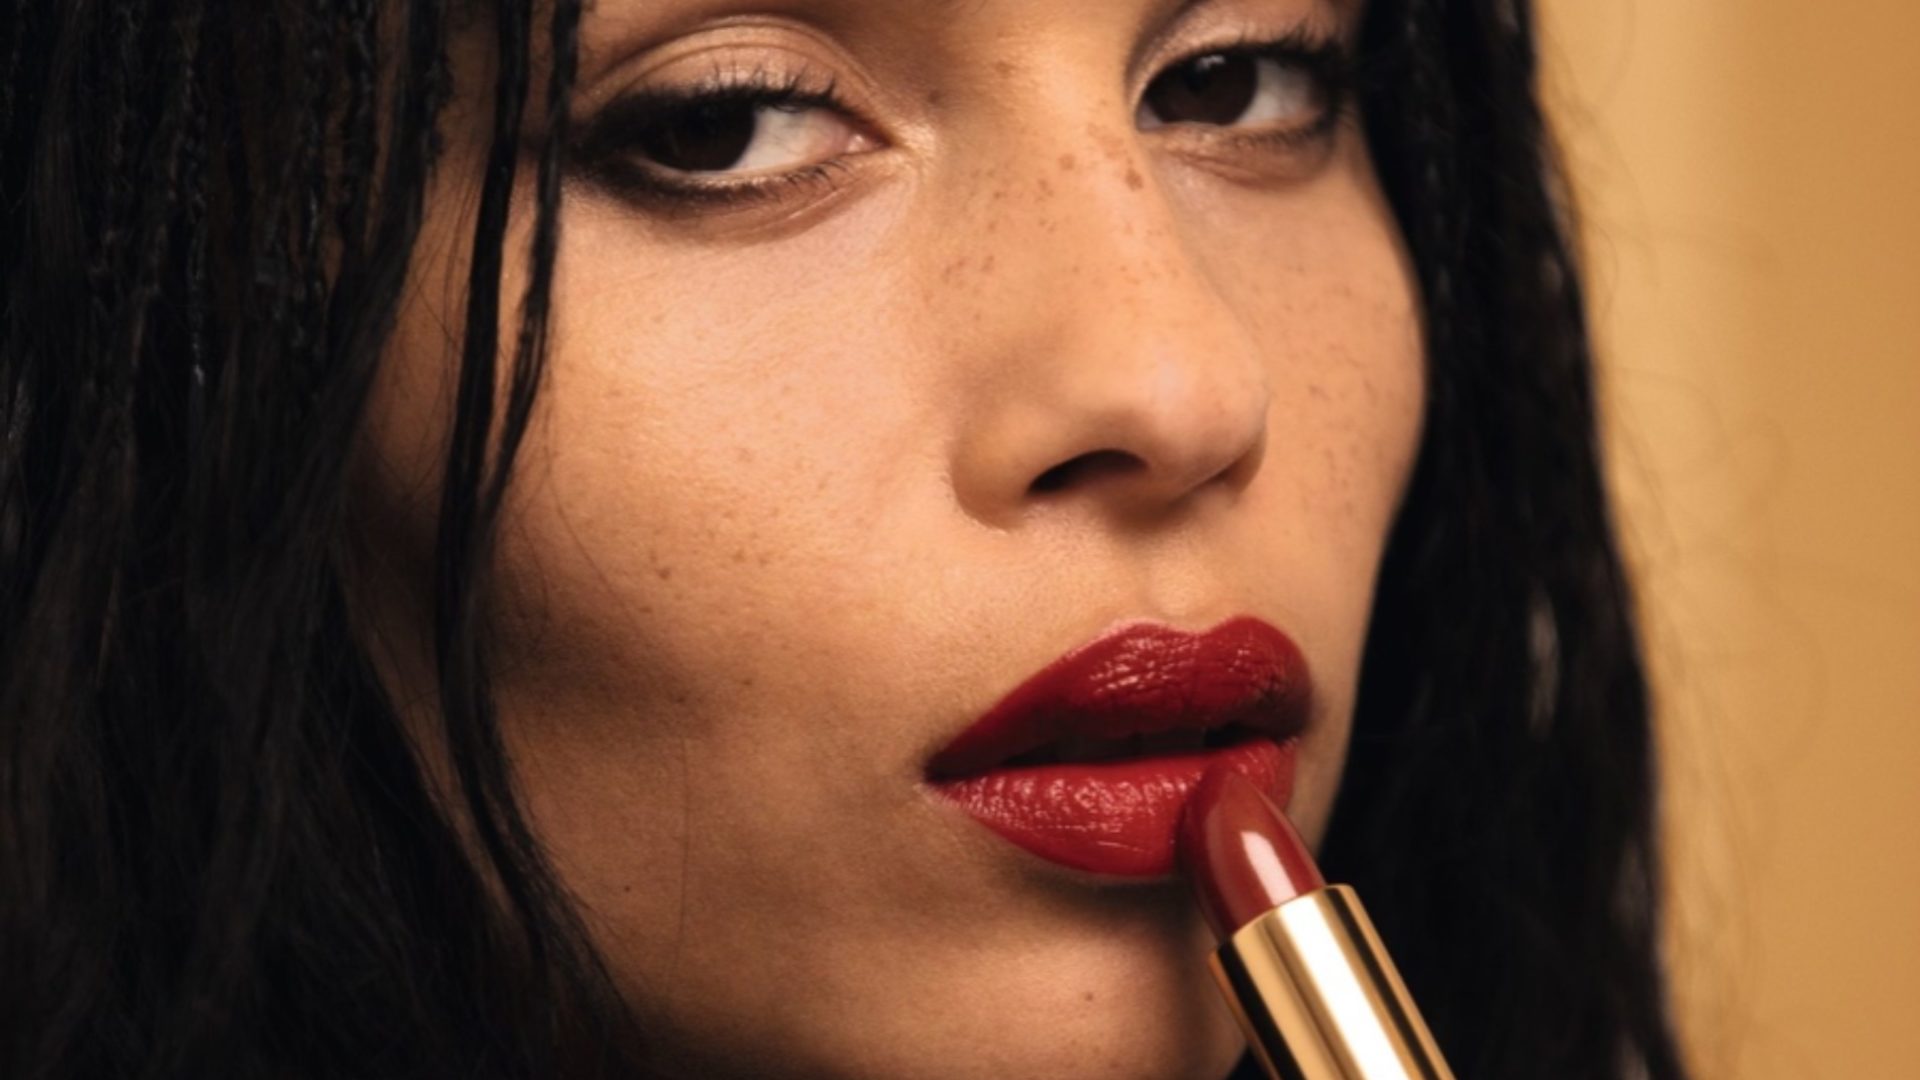 Zoe Kravitz Talks New YSL Lipstick Collection And The Women Who Inspired It